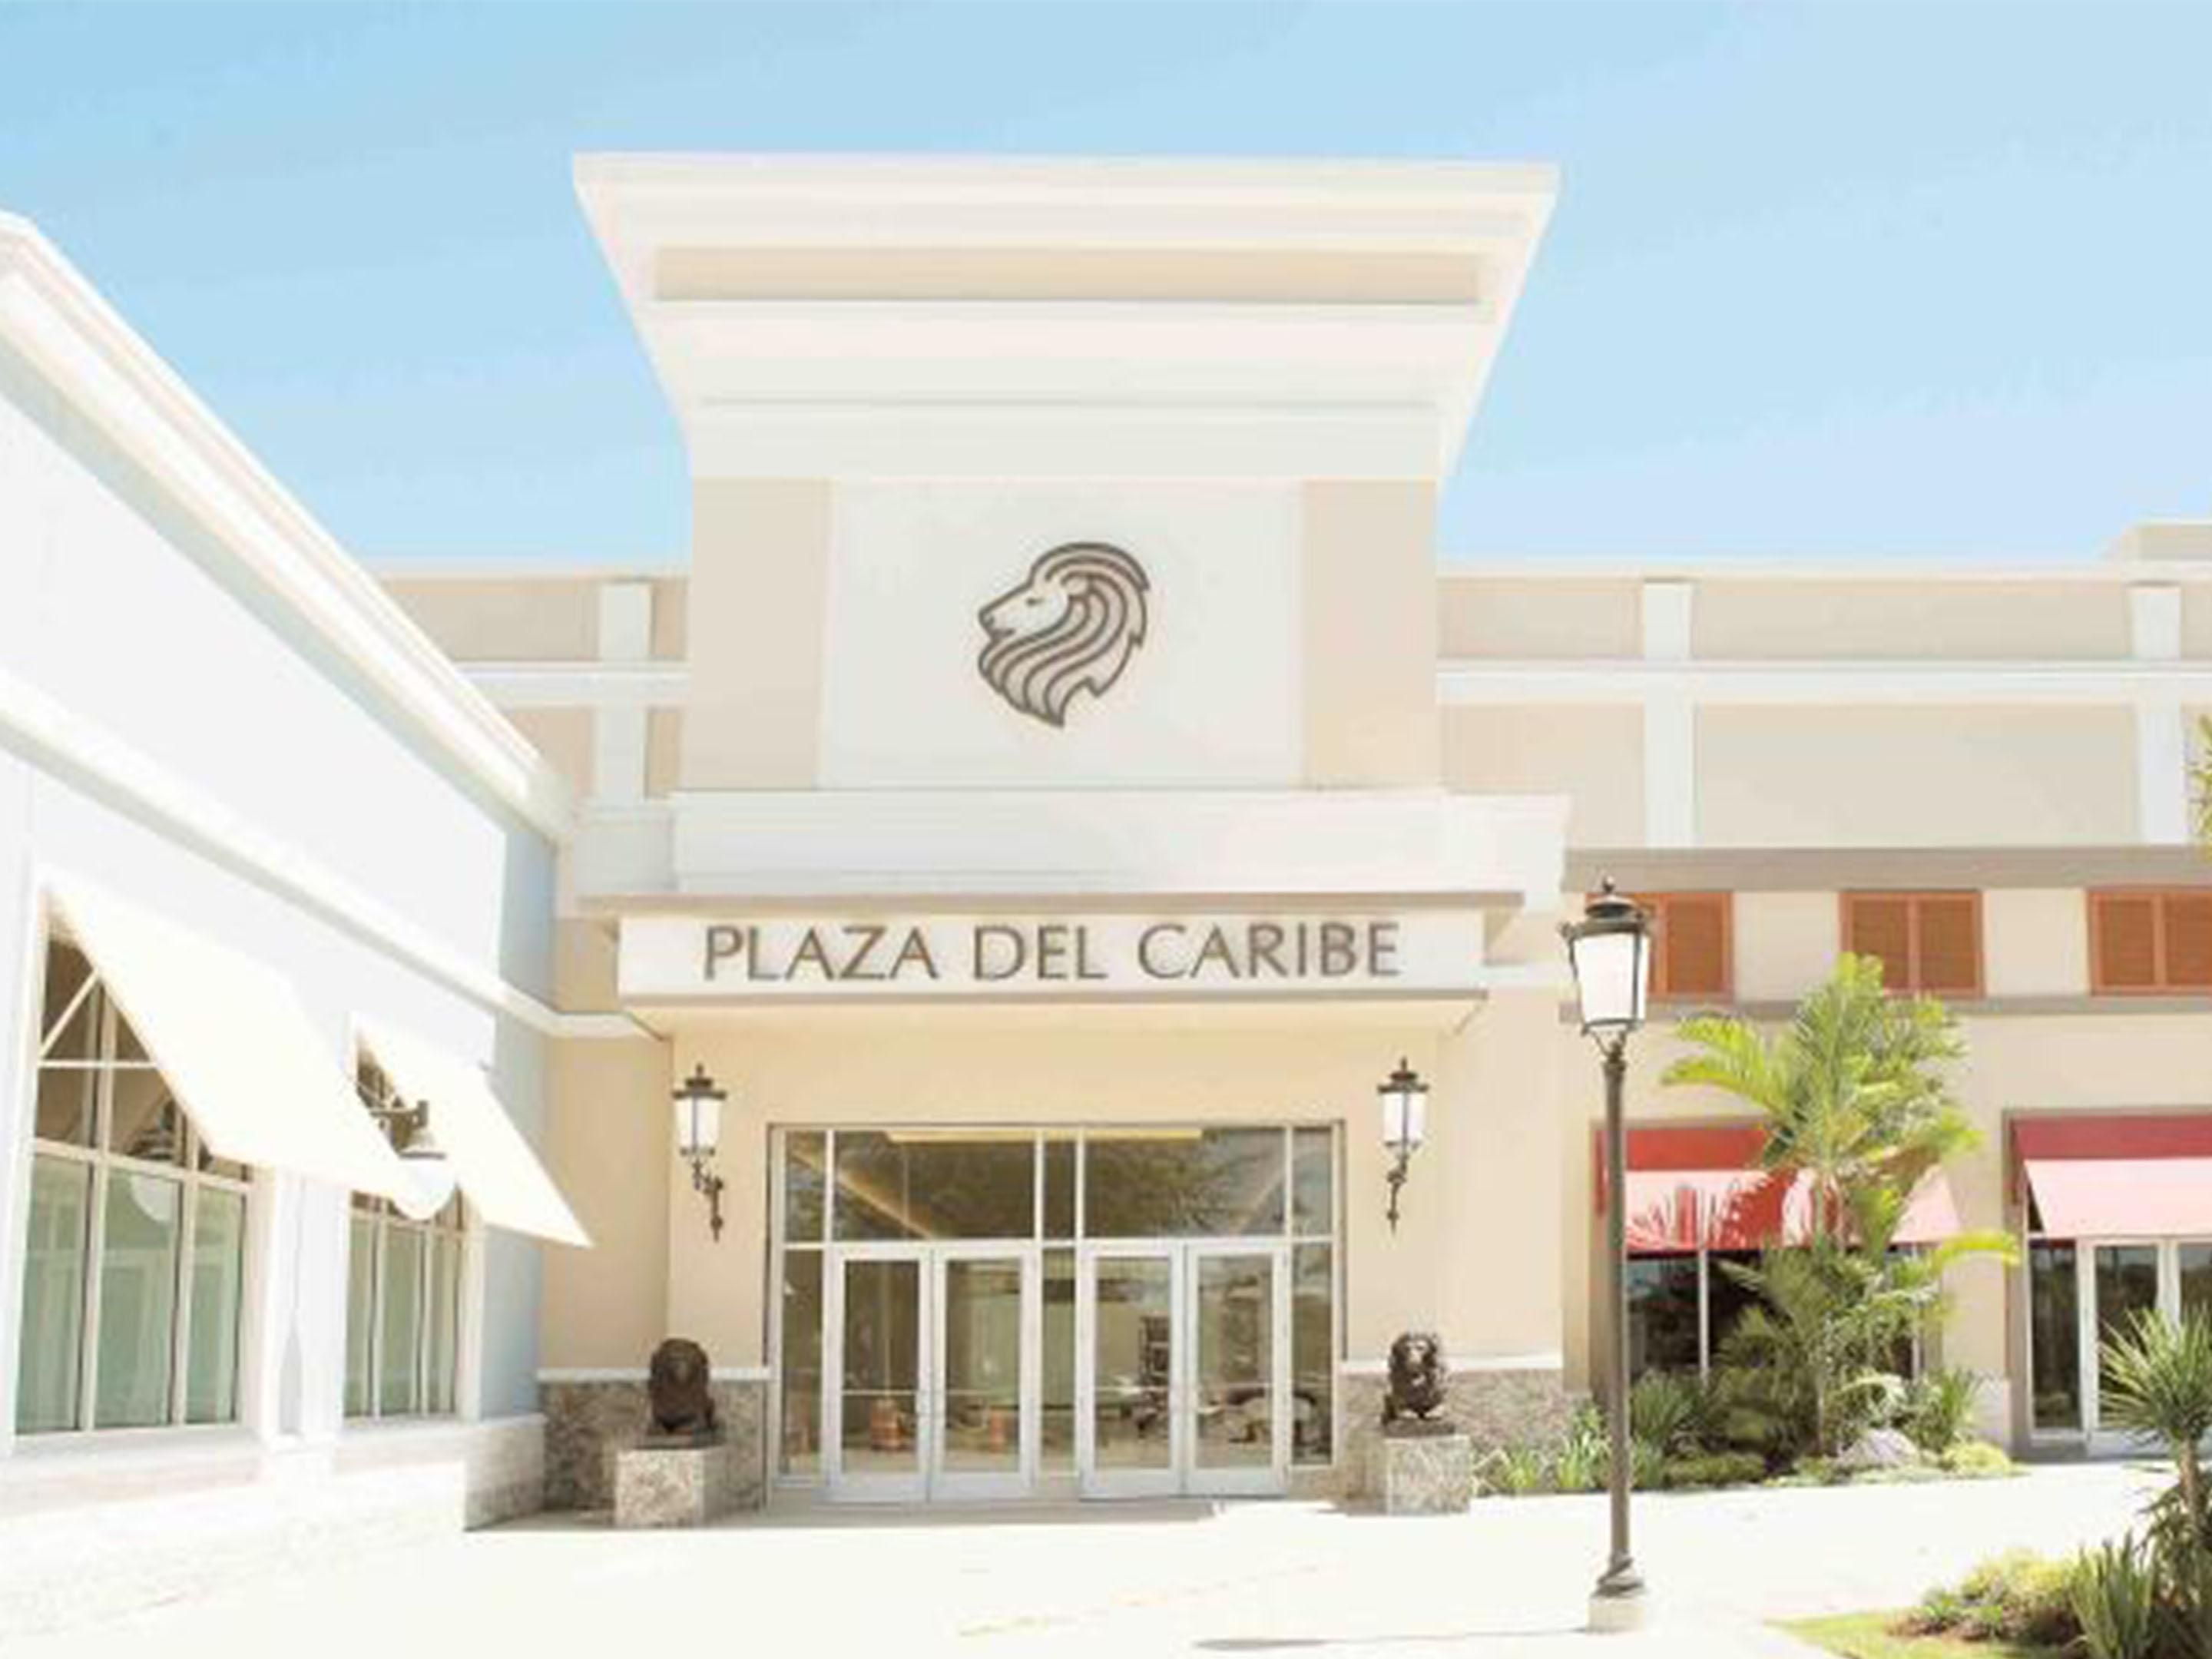 Like to shop? Then make sure to visit Plaza del Caribe! It’s the largest mall in southern Puerto Rico and includes popular department stores such as JCPenney, Macy’s and Sears. You’ll also enjoy the center’s distinctive architecture and the various works of art that are distributed throughout the entire mall.